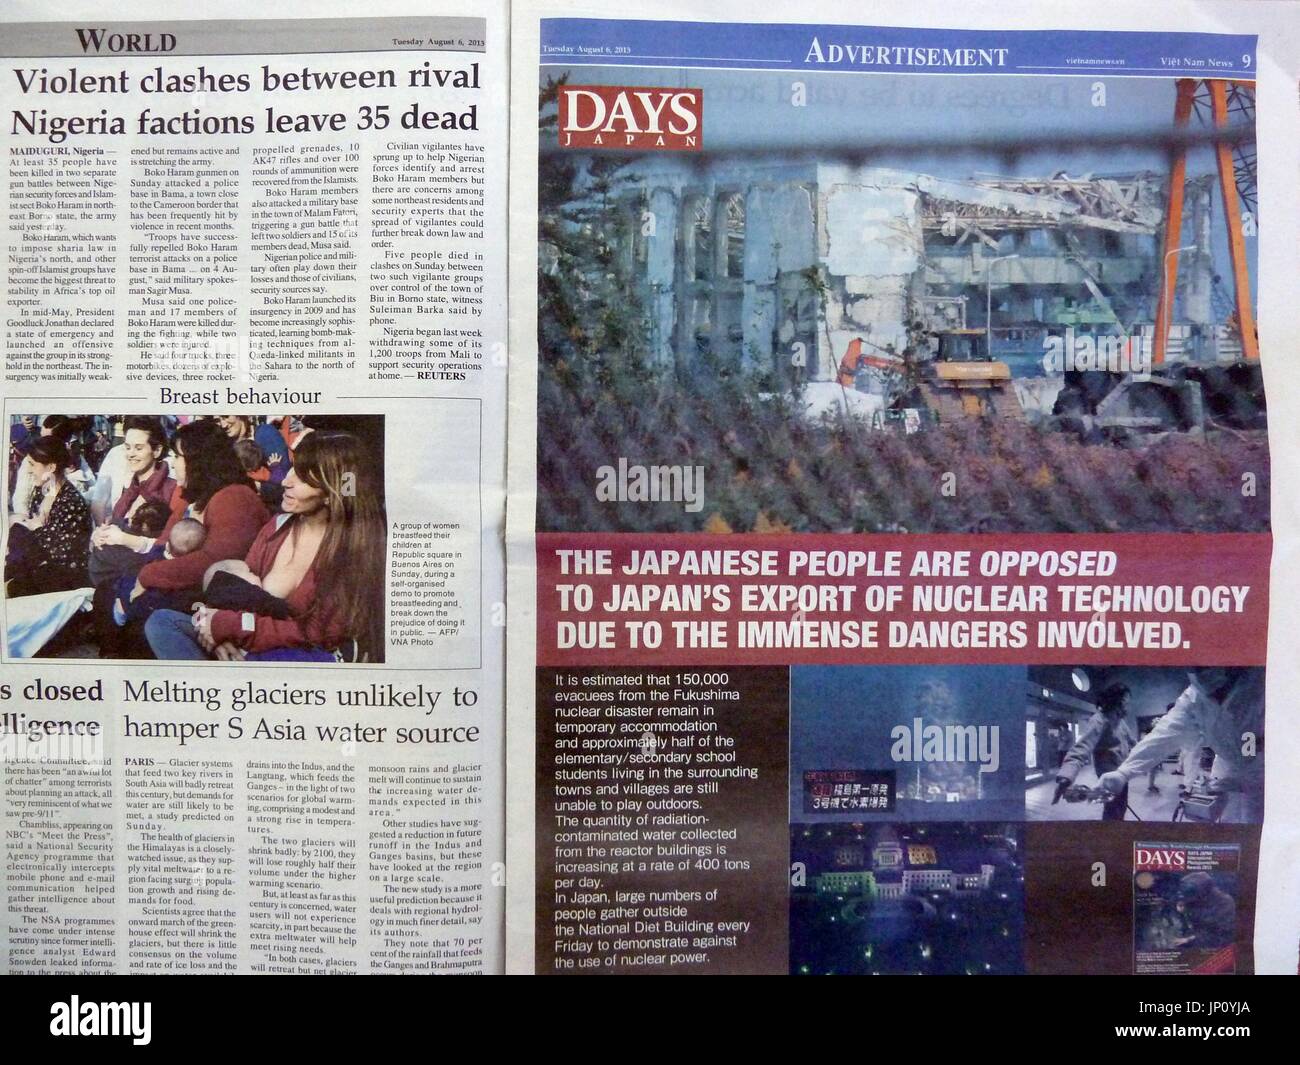 HANOI, Vietnam - Photo shows an opinion ad (R) objecting to planned nuclear reactor exports by Japan, published on Aug. 6, 2013, by Vietnam's state-run English-language daily Viet Nam News. The ad, sponsored by DAYS JAPAN, a monthly photo journalism magazine, was published to coincide with the 68th anniversary of the 1945 atomic bombing of Hiroshima. (Kyodo) Stock Photo